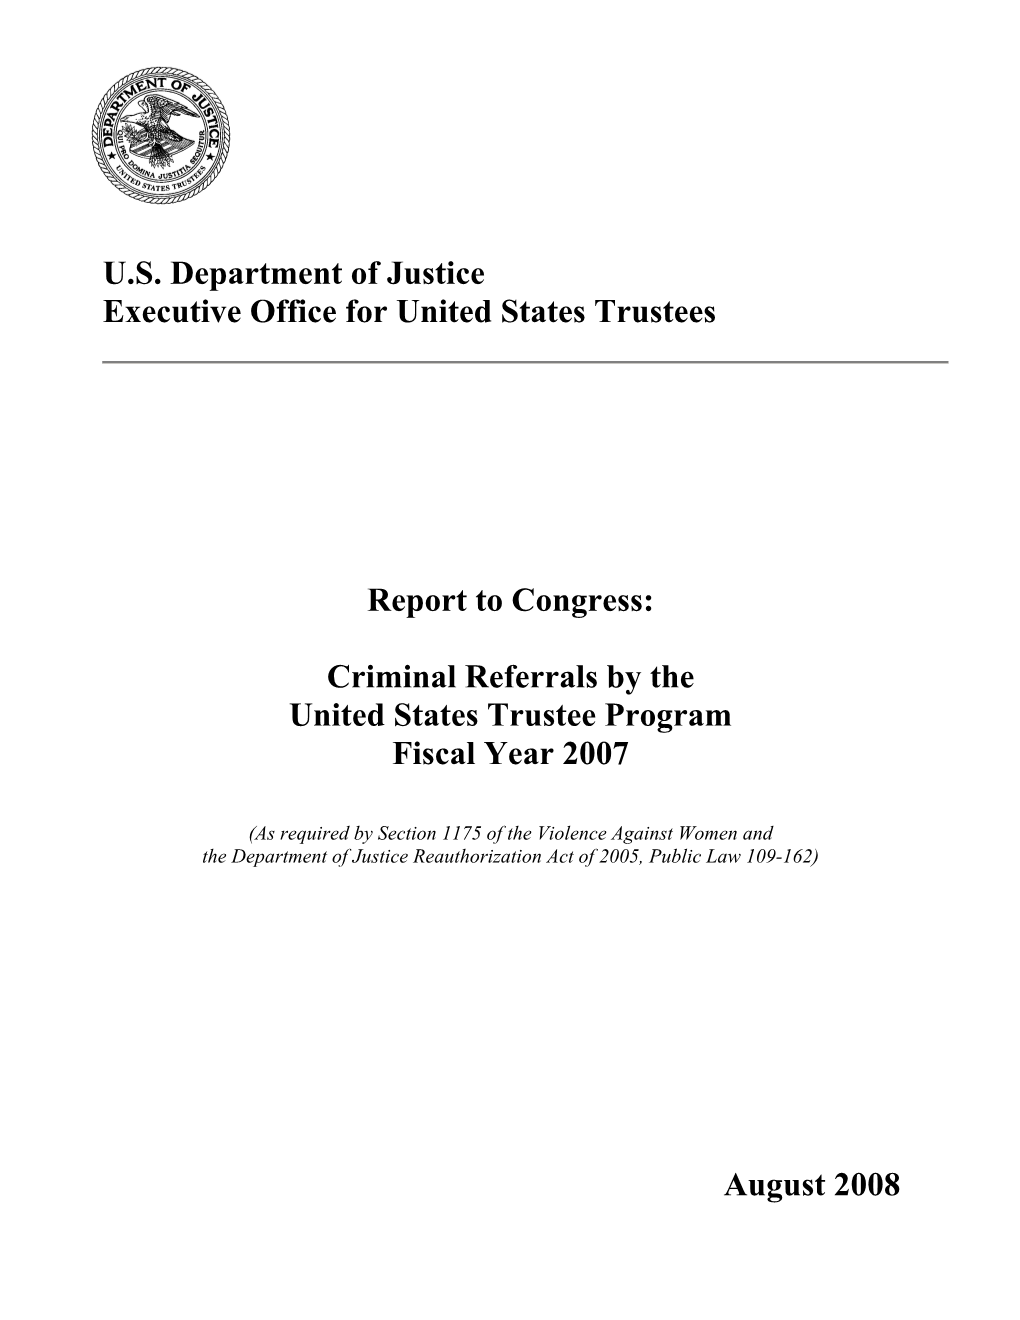 Report to Congress: Criminal Referrals by the United States Trustee Program Fiscal Year 2007